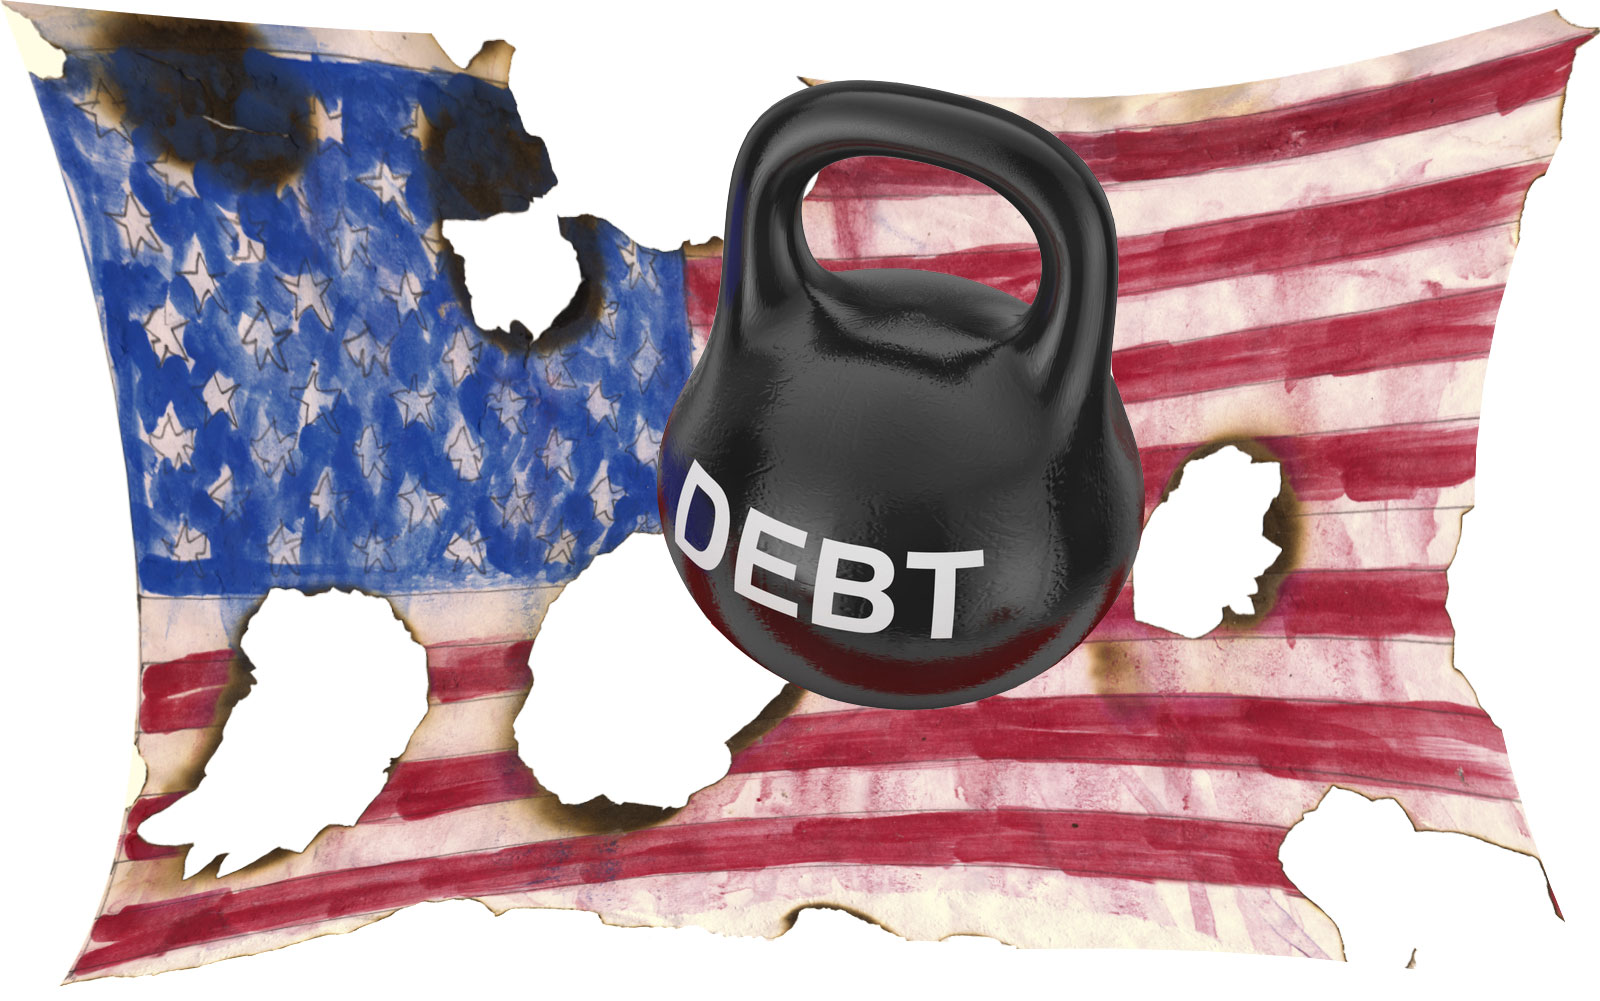 The debt crisis is a threat to an already damaged American democracy